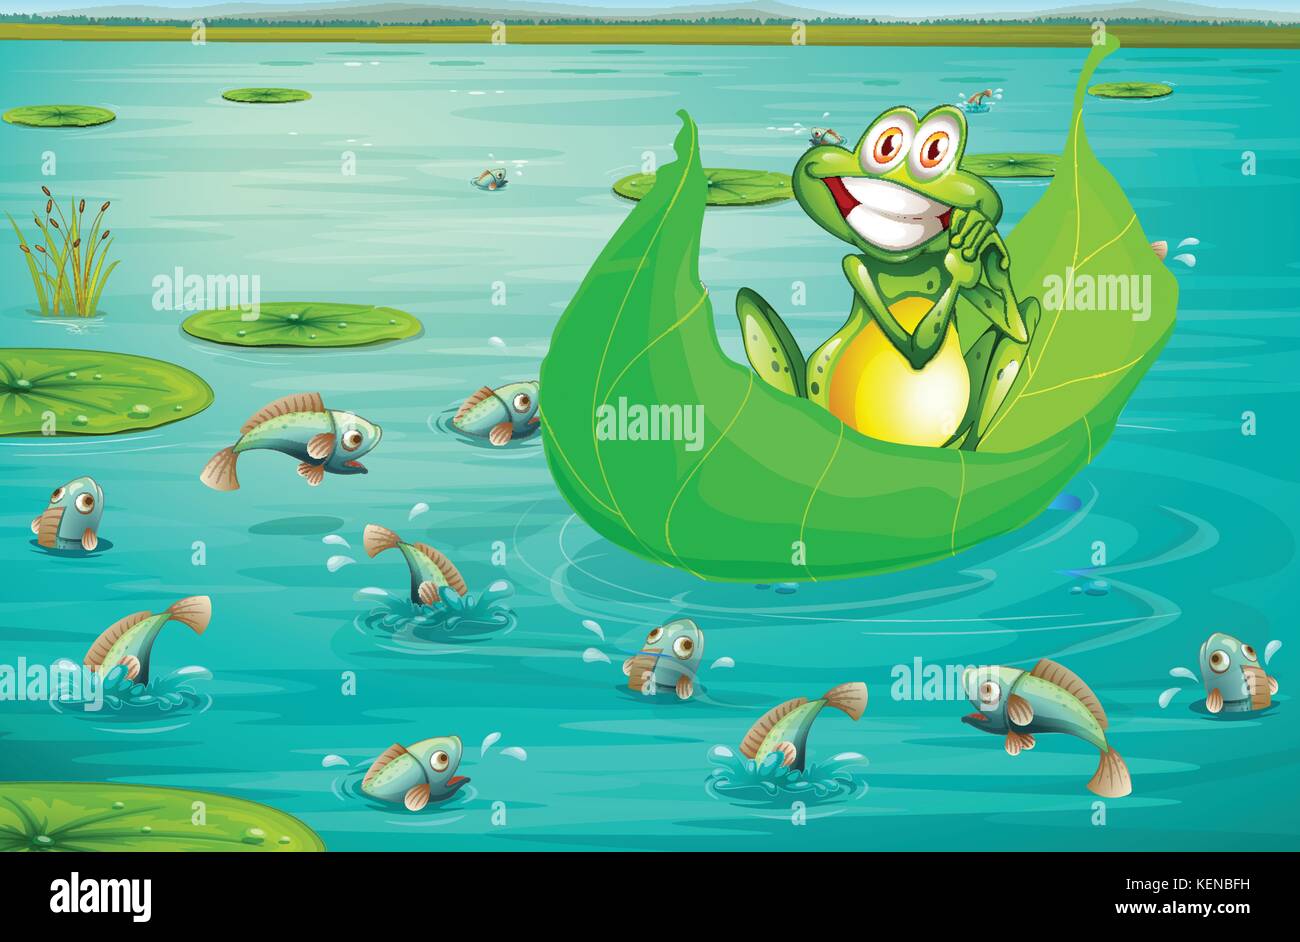 Illustration of a frog in a pond Stock Vector